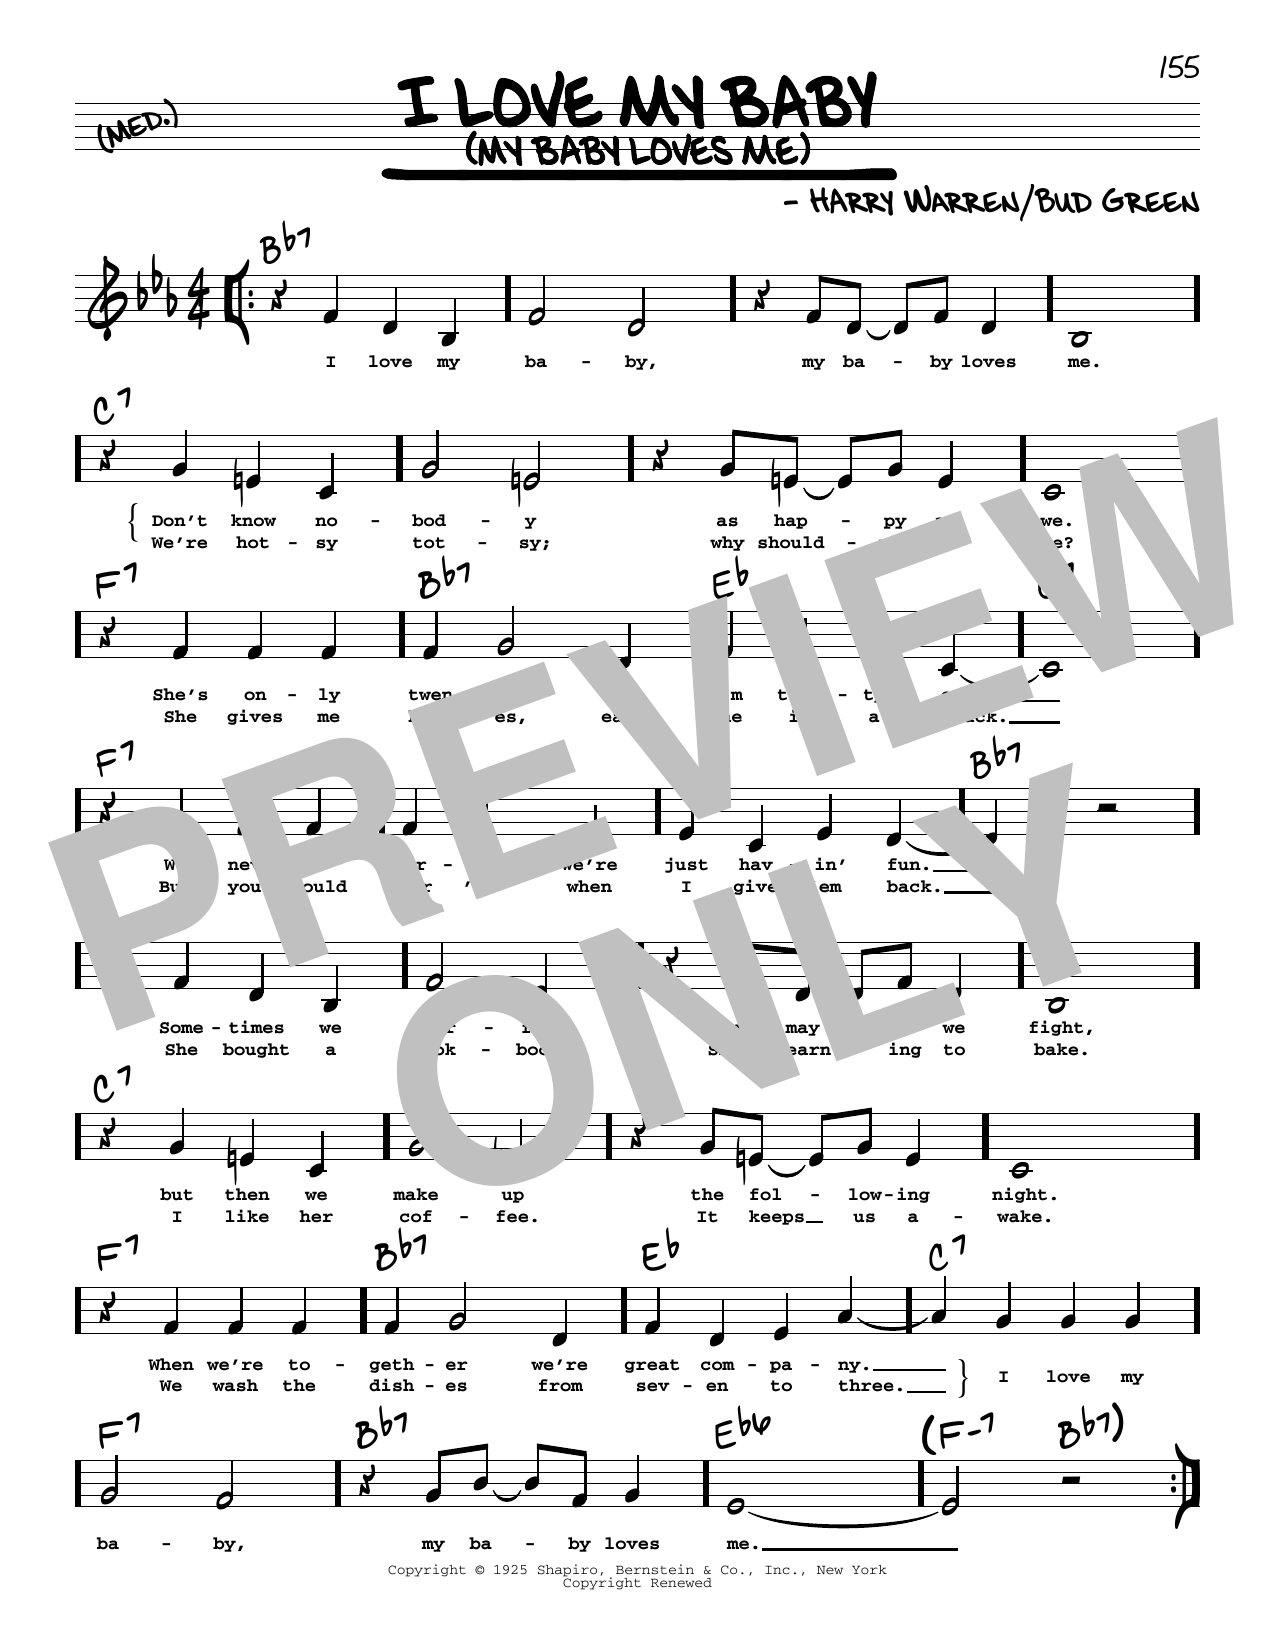 Bud Green I Love My Baby (My Baby Loves Me) (Low Voice) sheet music notes printable PDF score